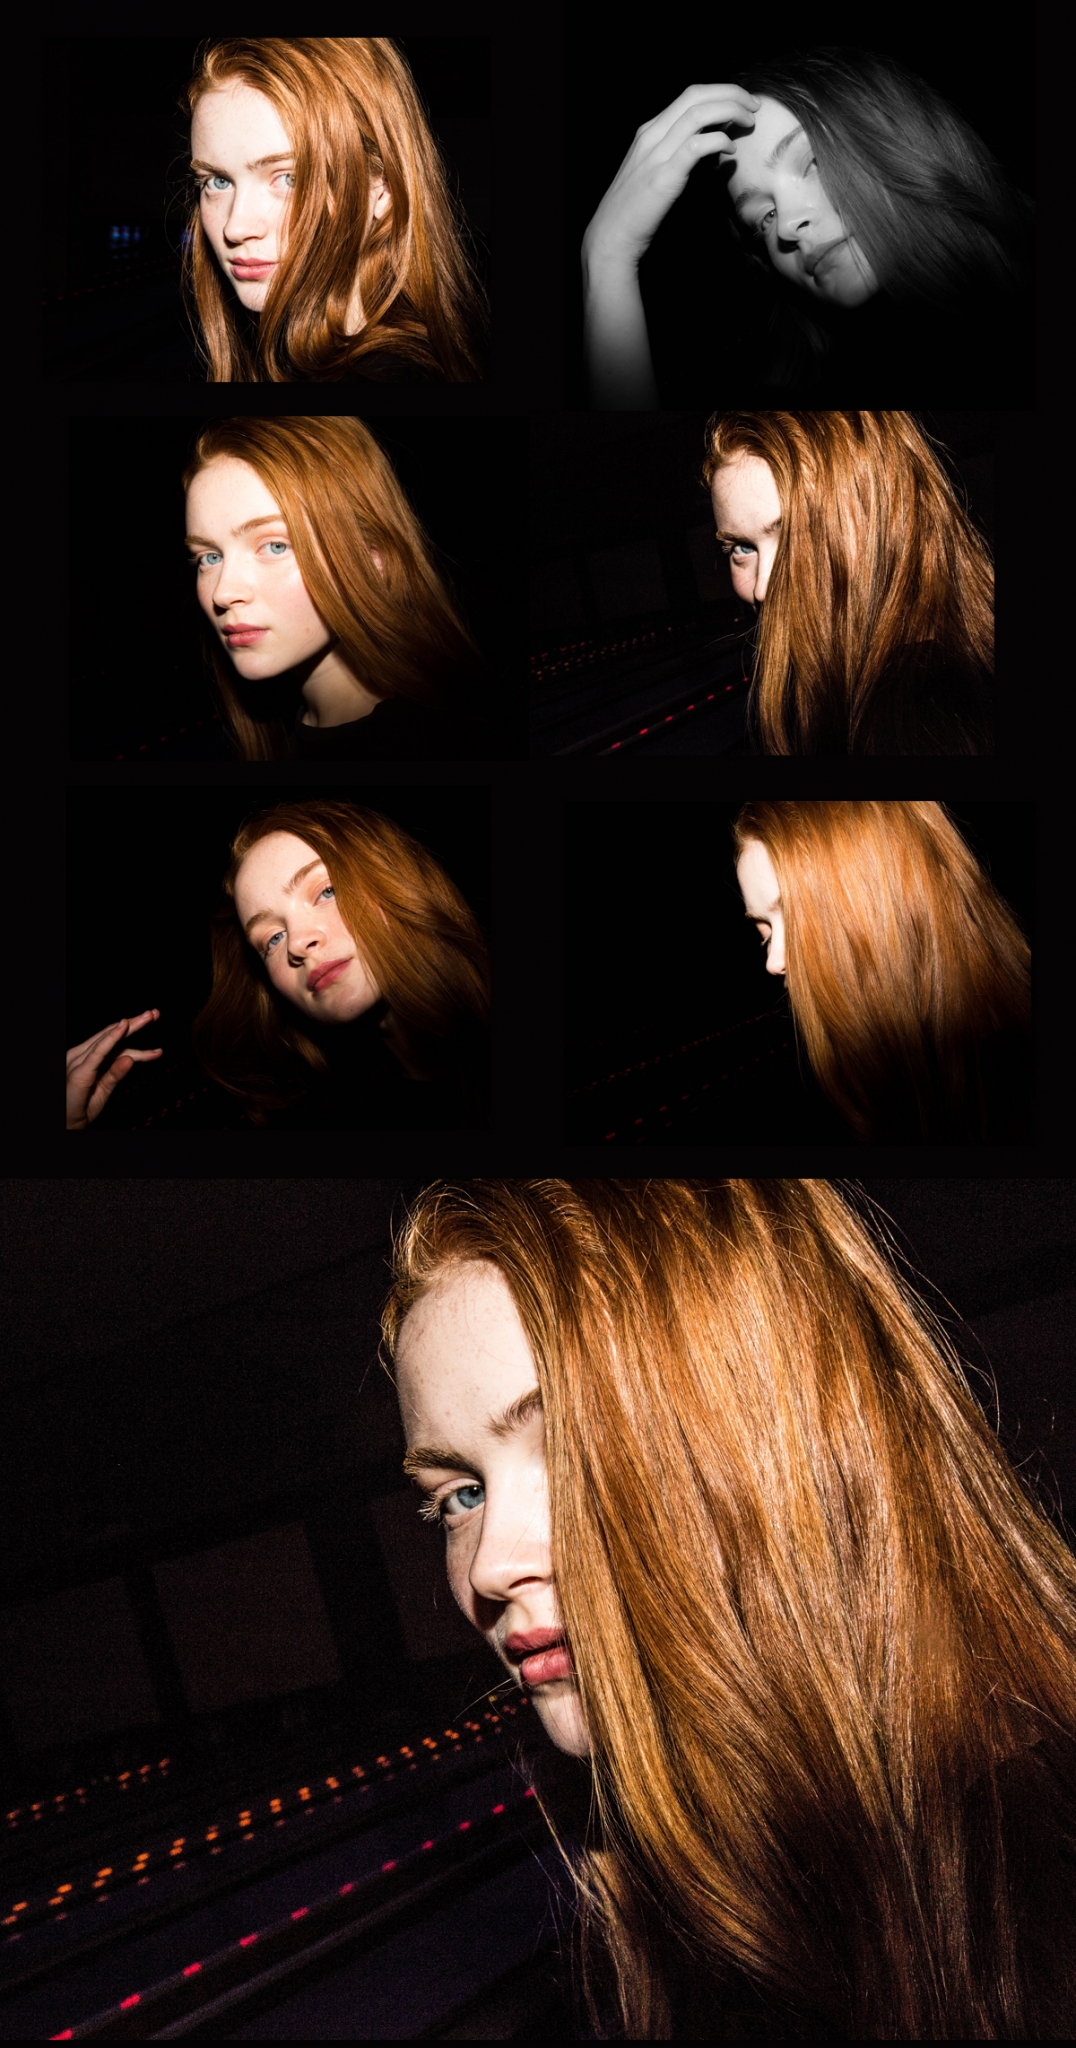 Sadie Sink Fan: Click image to close this window